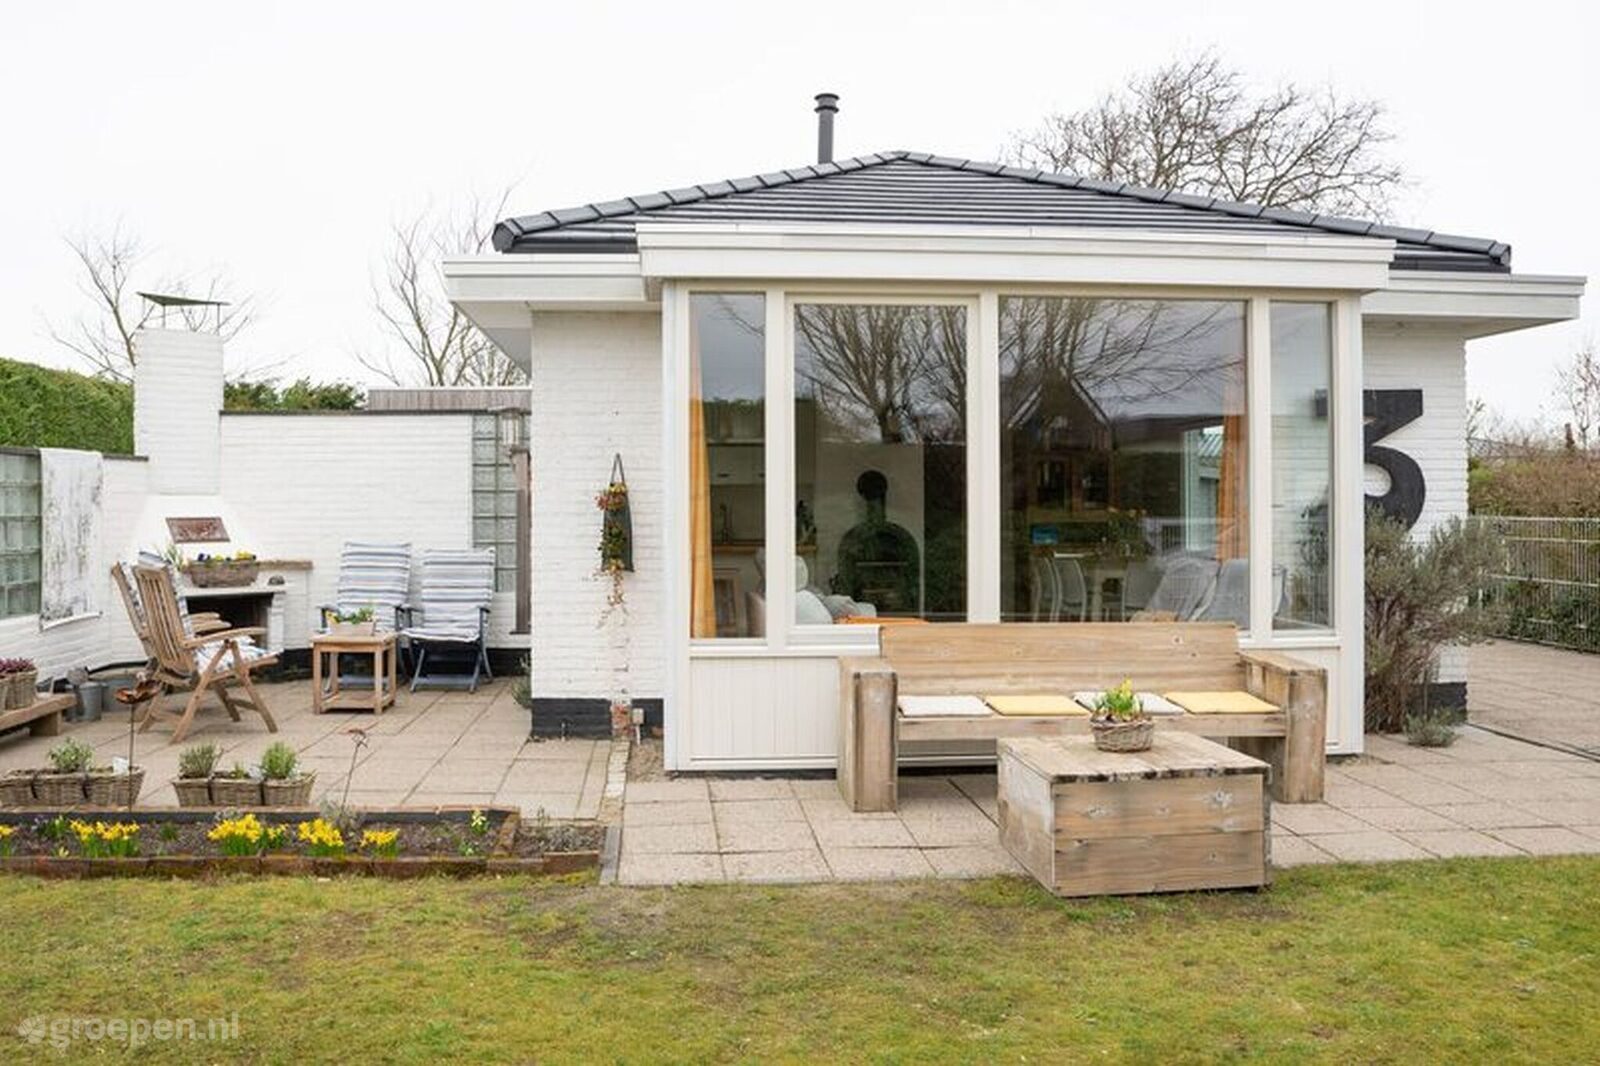 Holiday home Renesse